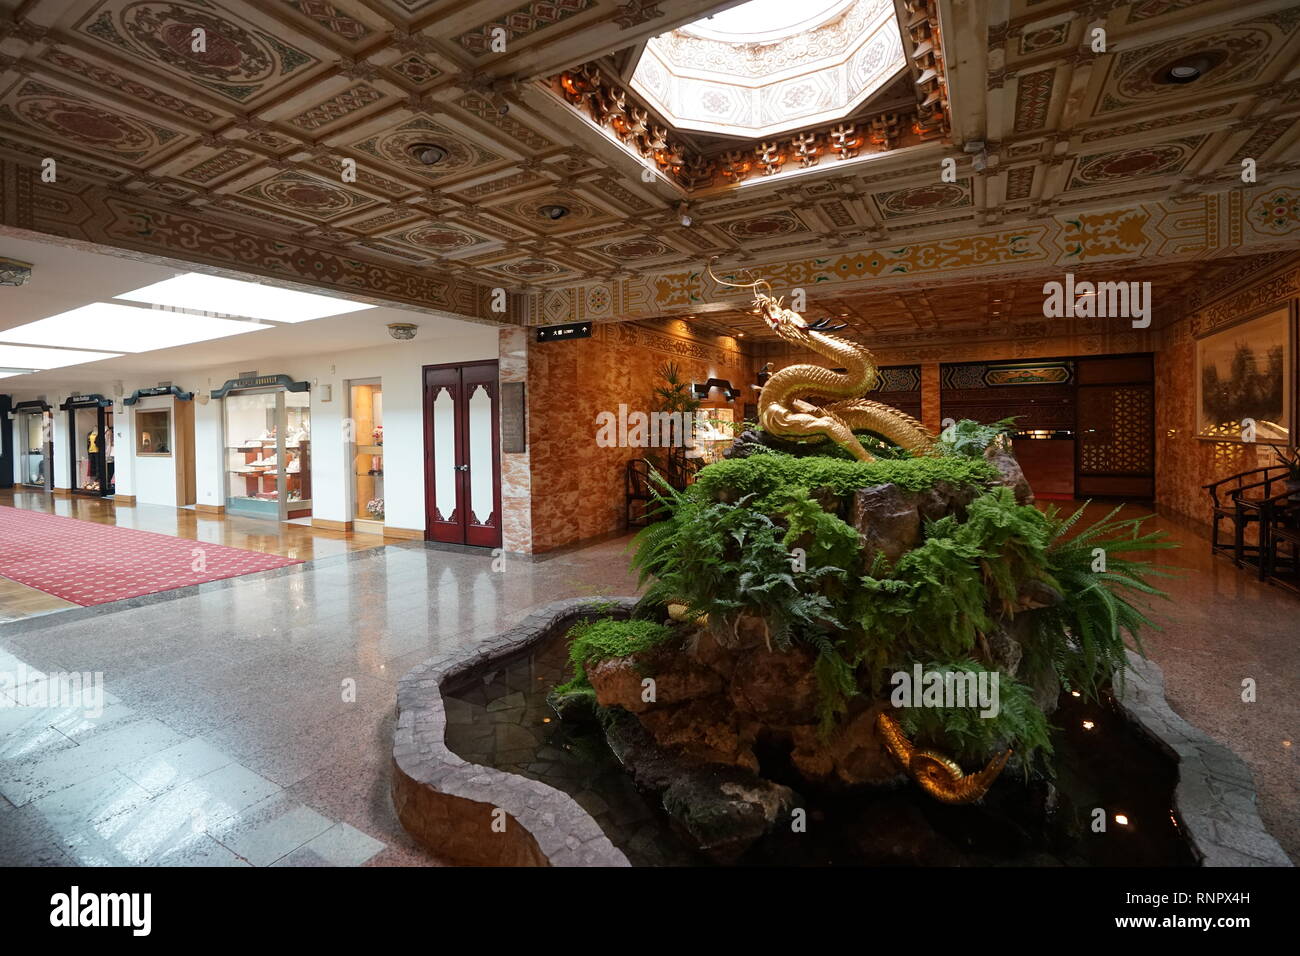 The magnificent statue of golden dragon inside the Grand Hotel. Stock Photo